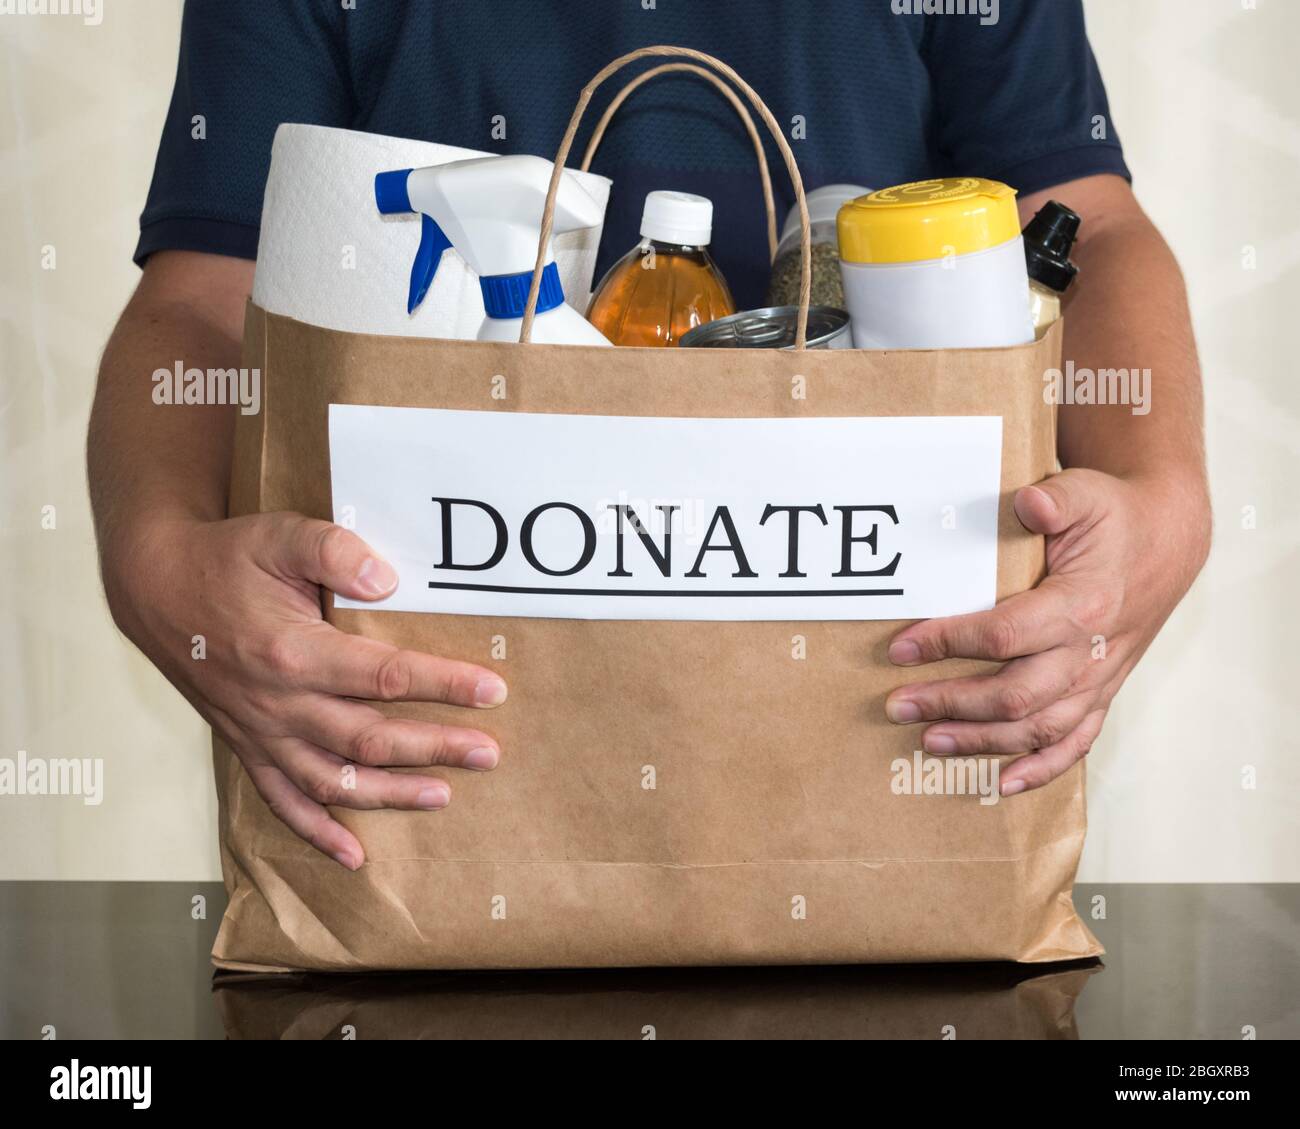 A volunteer collects a donation bag containing cleaning & food supplies to be delivered to those in need during the Coronavirus / Covid-19 Pandemic Stock Photo